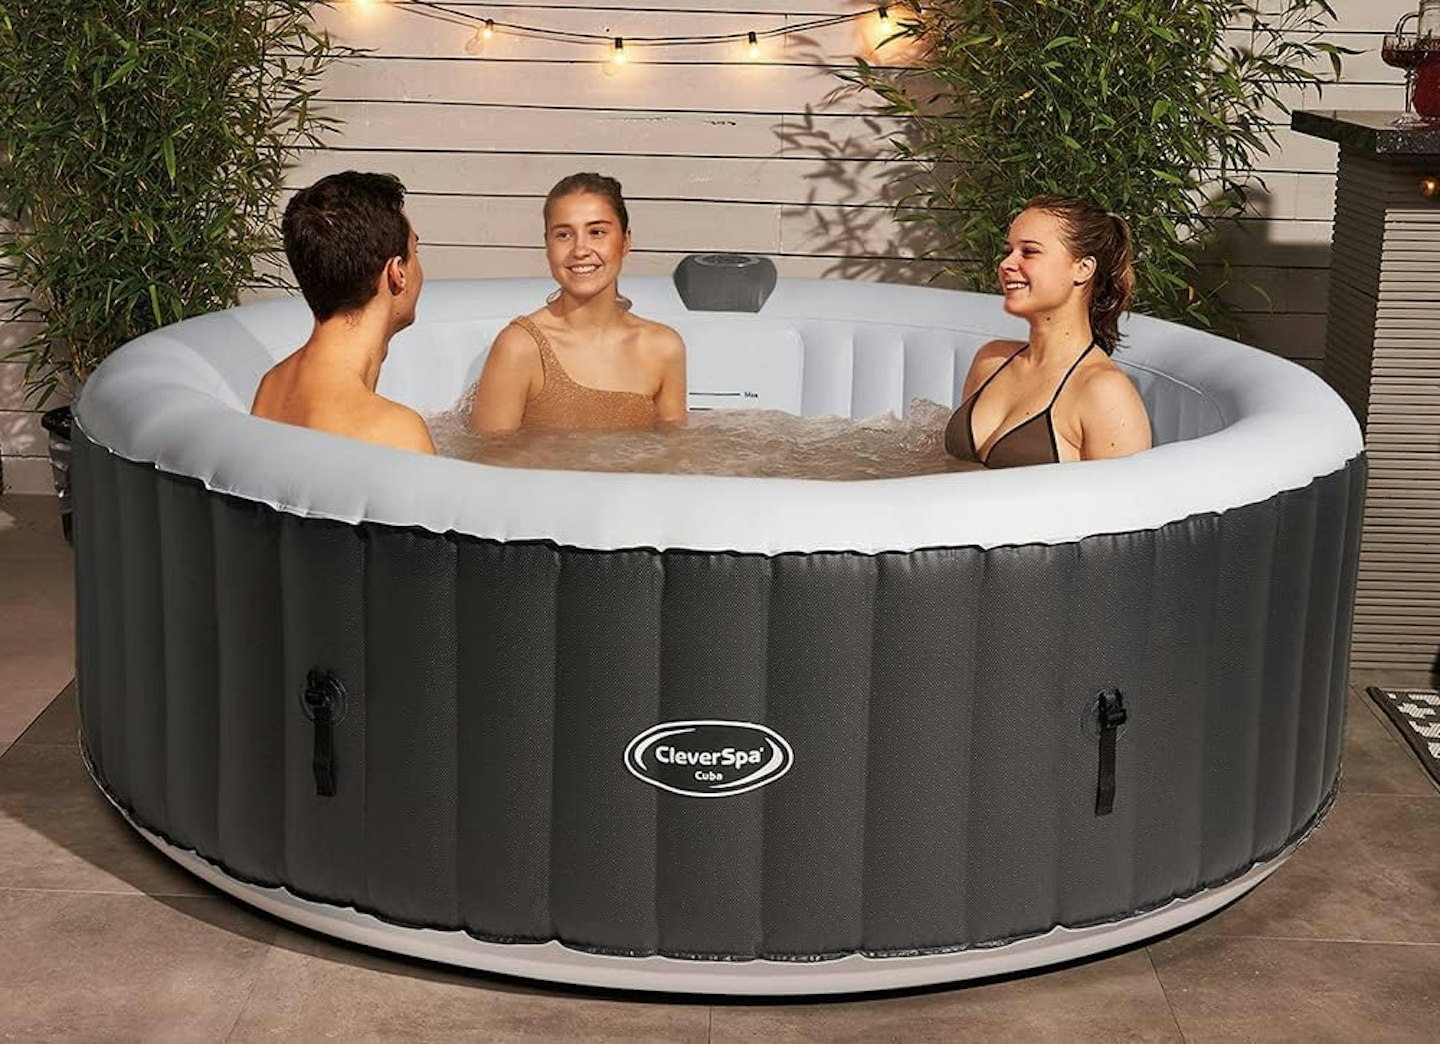 CleverSpa Cuba 6 Person Round Inflatable Outdoor Bubble Spa Hot Tub